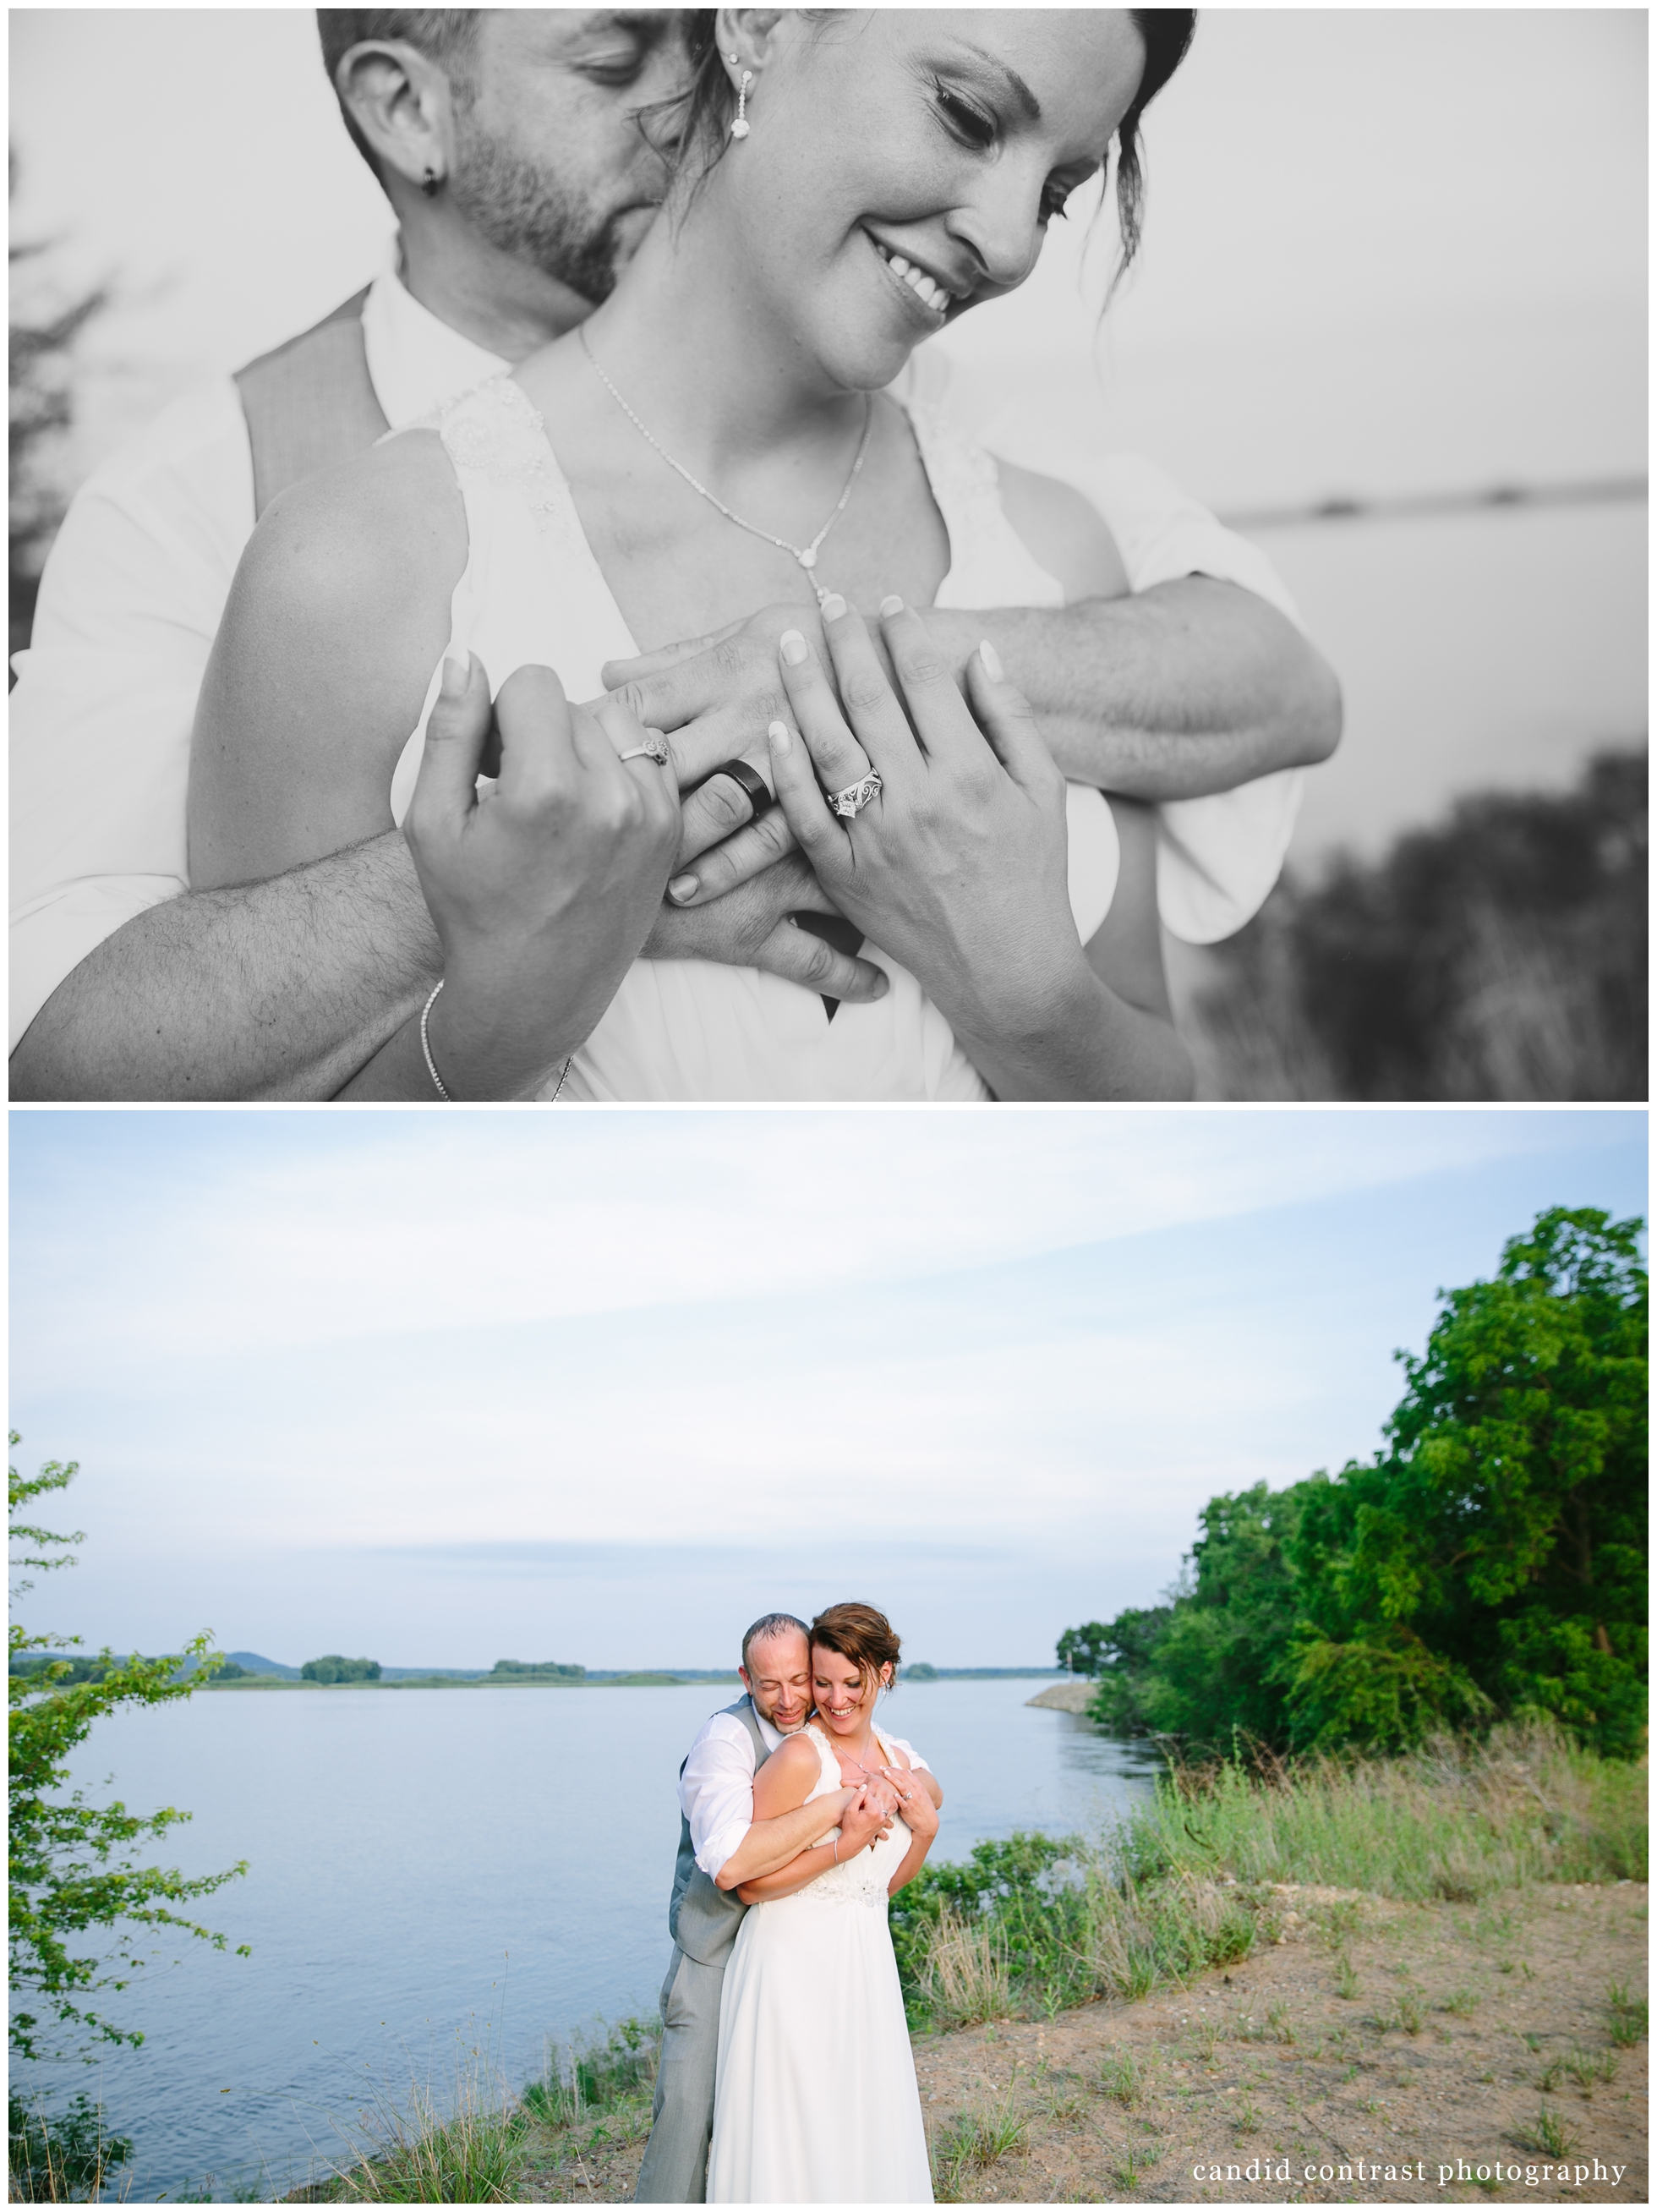 bride and groom sunset portraits at a bellevue iowa outdoor wedding at the shore event center, iowa wedding photographer candid contrast photography